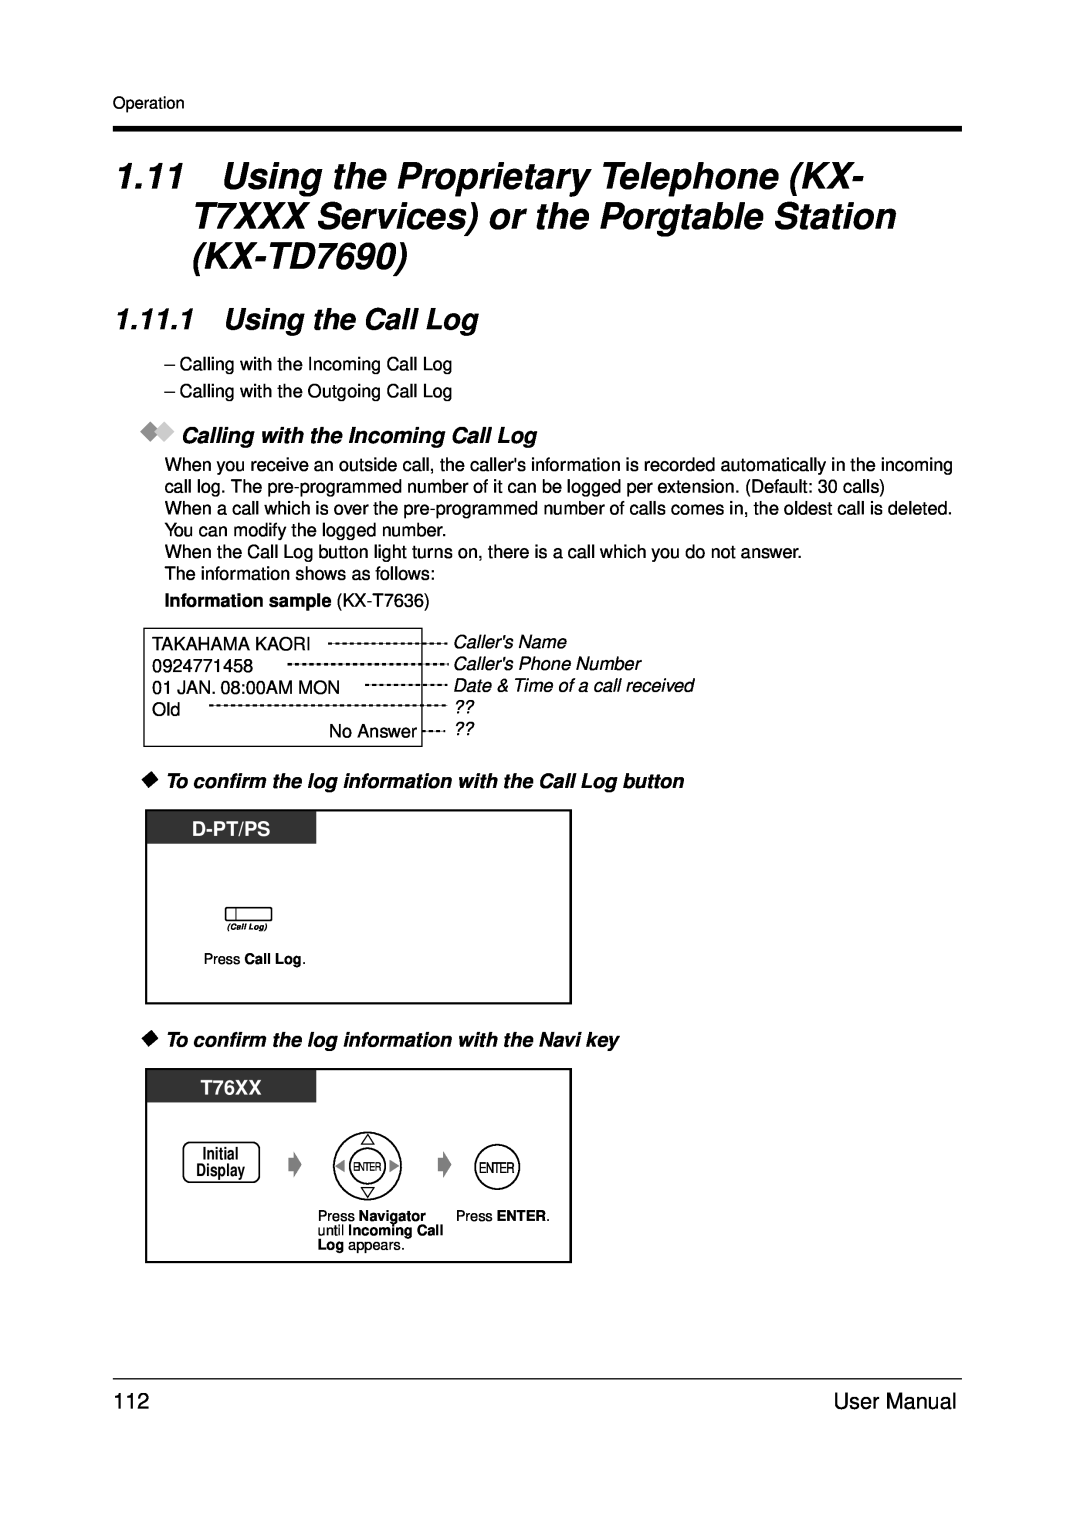 Panasonic KX-TDA200 user manual 1.11.1Using the Call Log, Calling with the Incoming Call Log, D-Pt/Ps, T76XX 